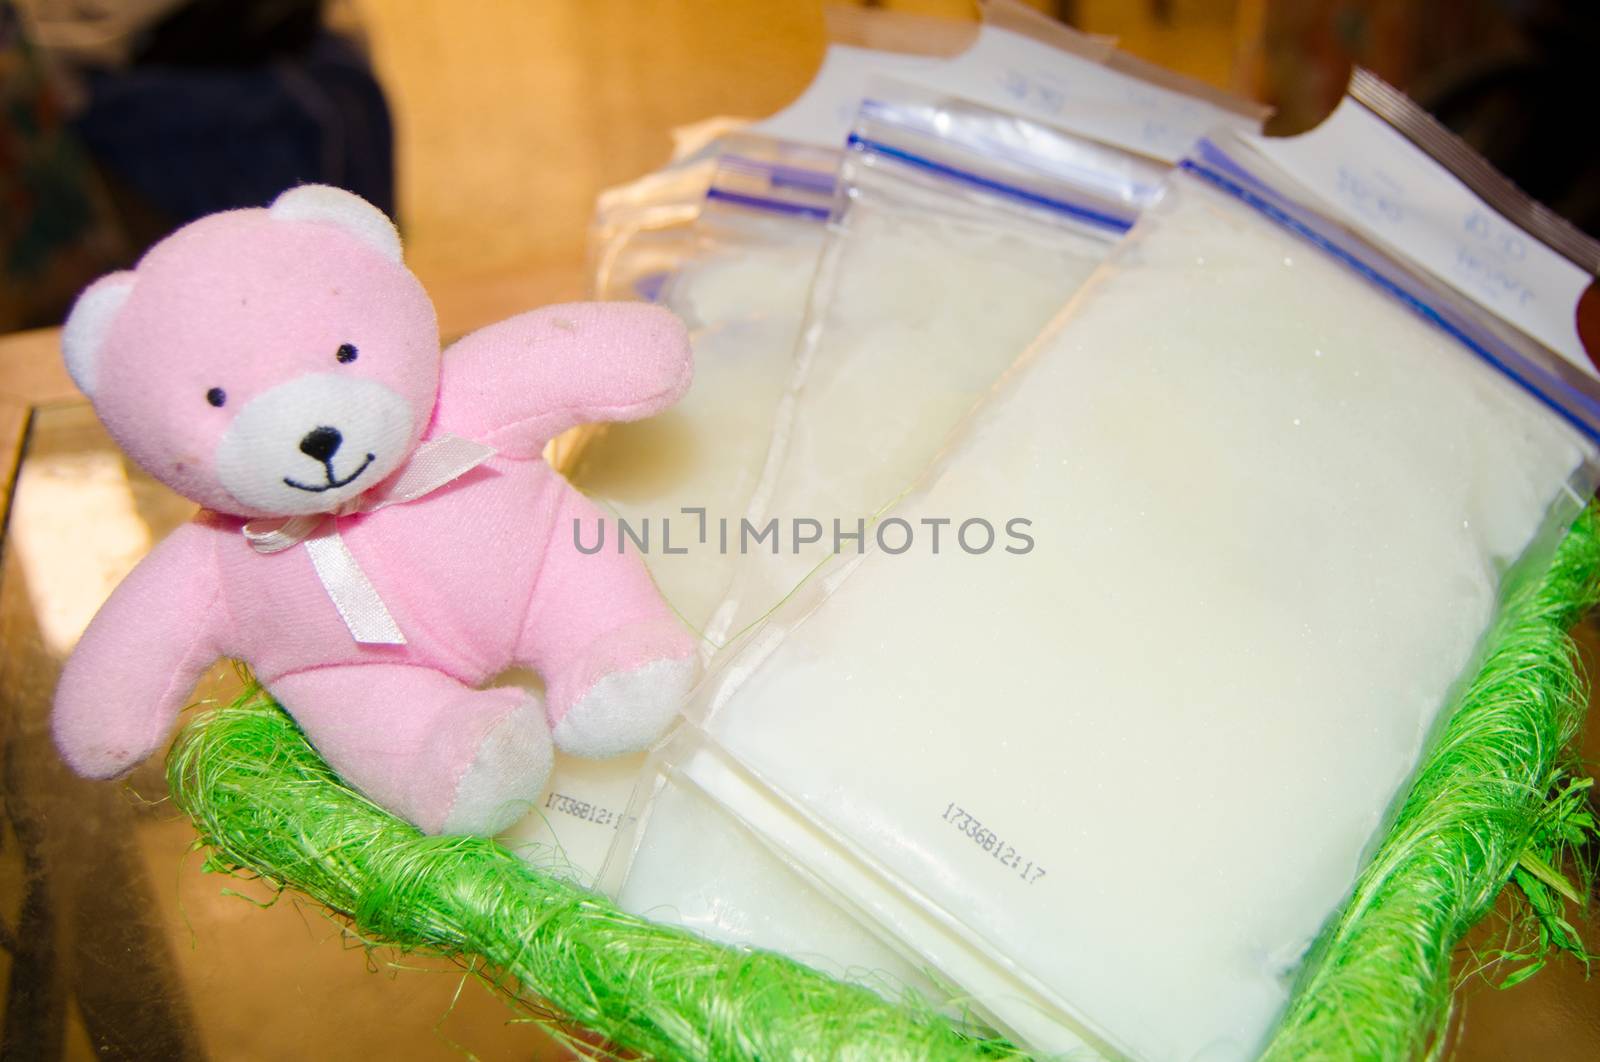 frozen breast milk in storage bags in the basket, with soft toy pink teddy bear by negmardesign